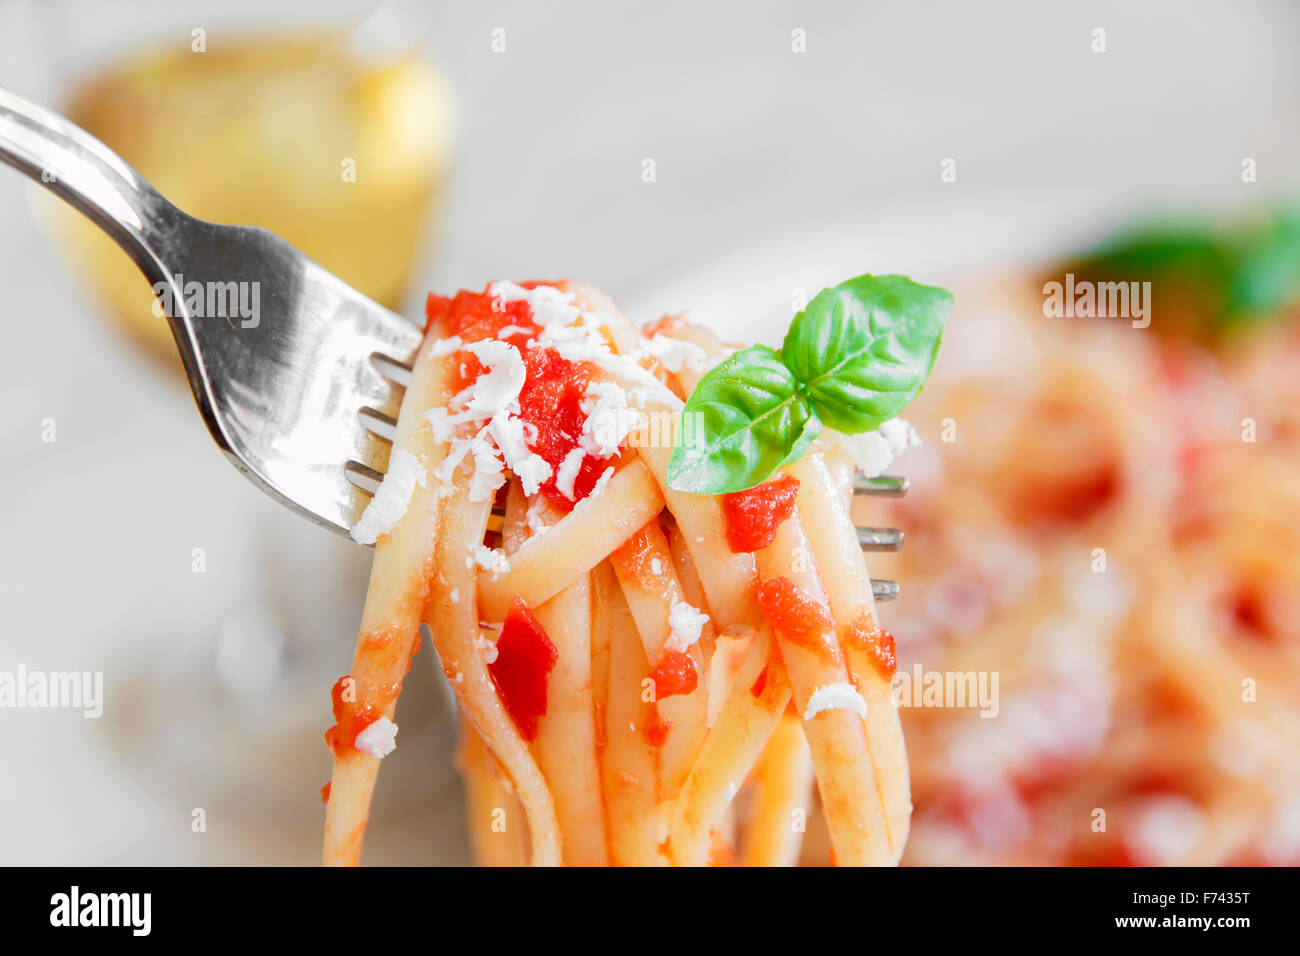 linguine pasta with tomato sauce and cheese on a plate Stock Photo